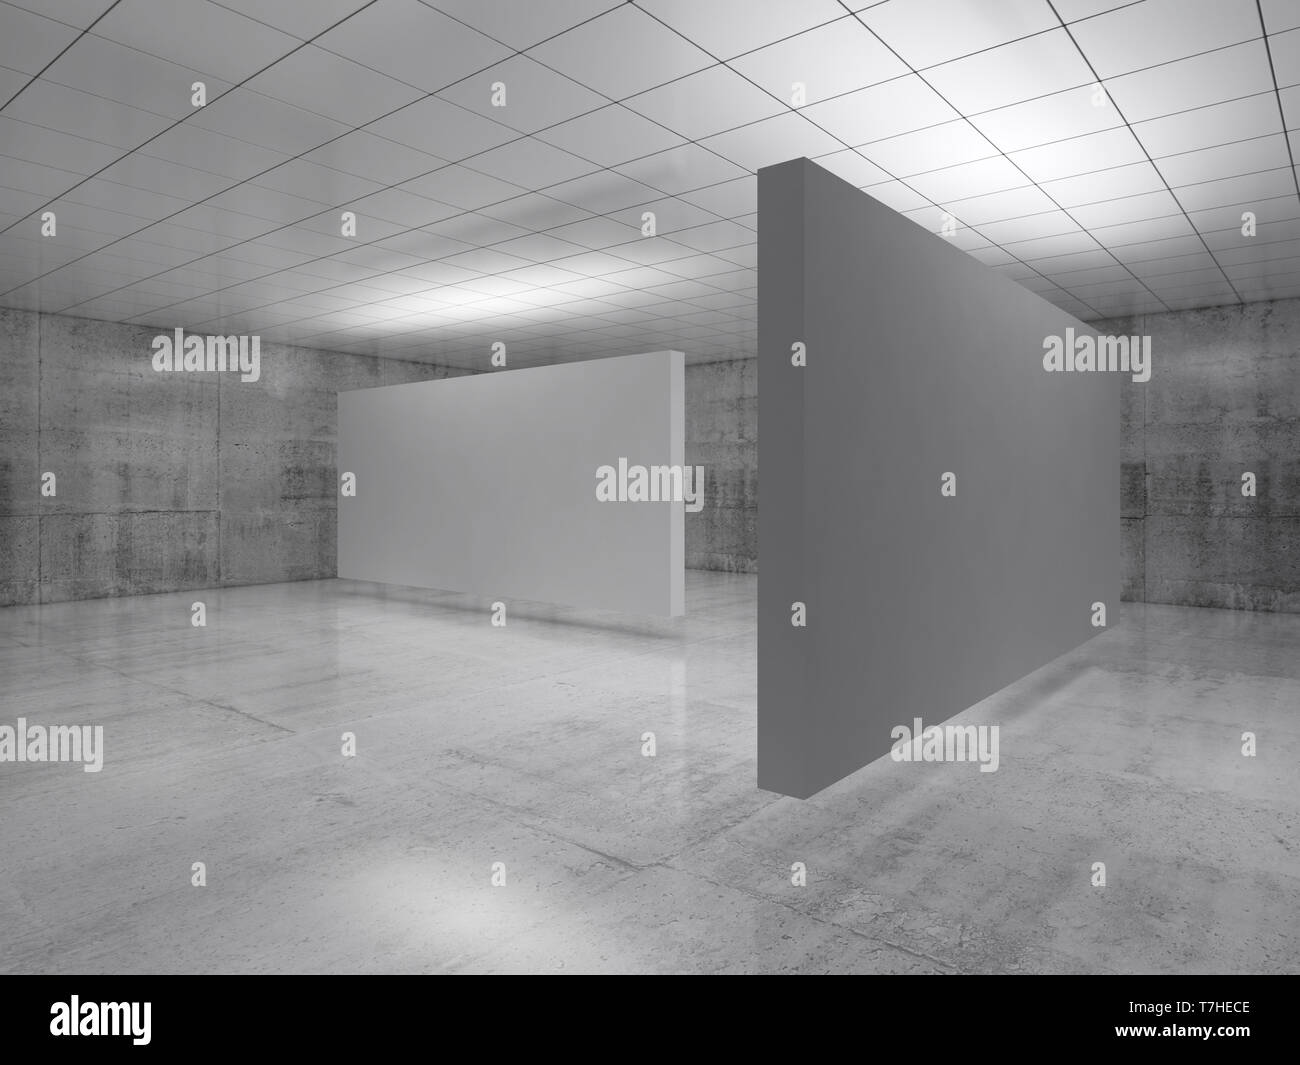 Abstract empty minimalist interior design, white stands installation levitating in exhibition gallery. Contemporary architecture. 3d illustration Stock Photo